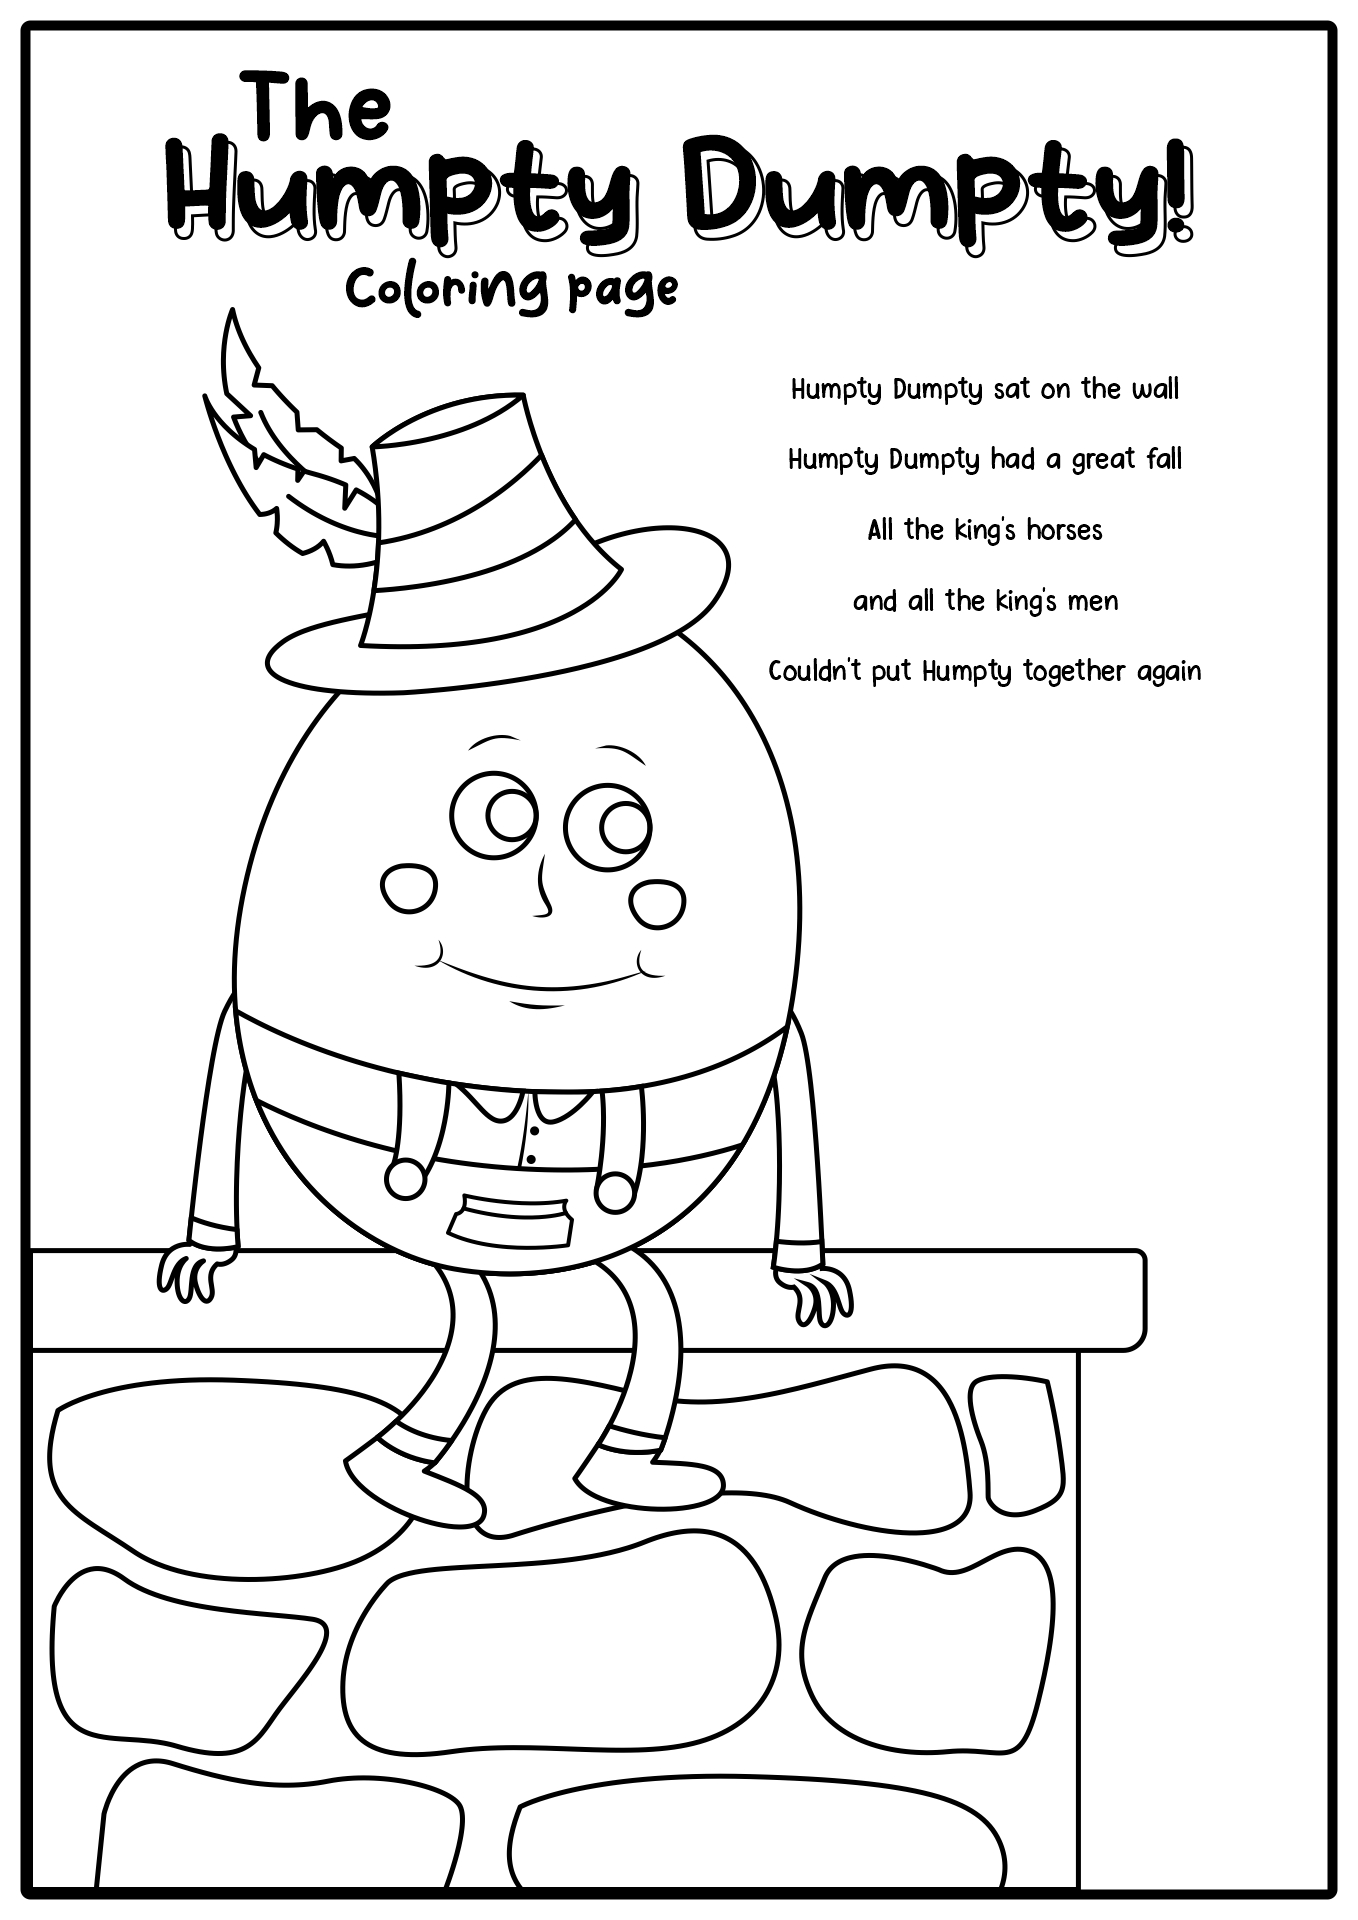 humpty-dumpty-coloring-sketch-coloring-page-the-best-porn-website